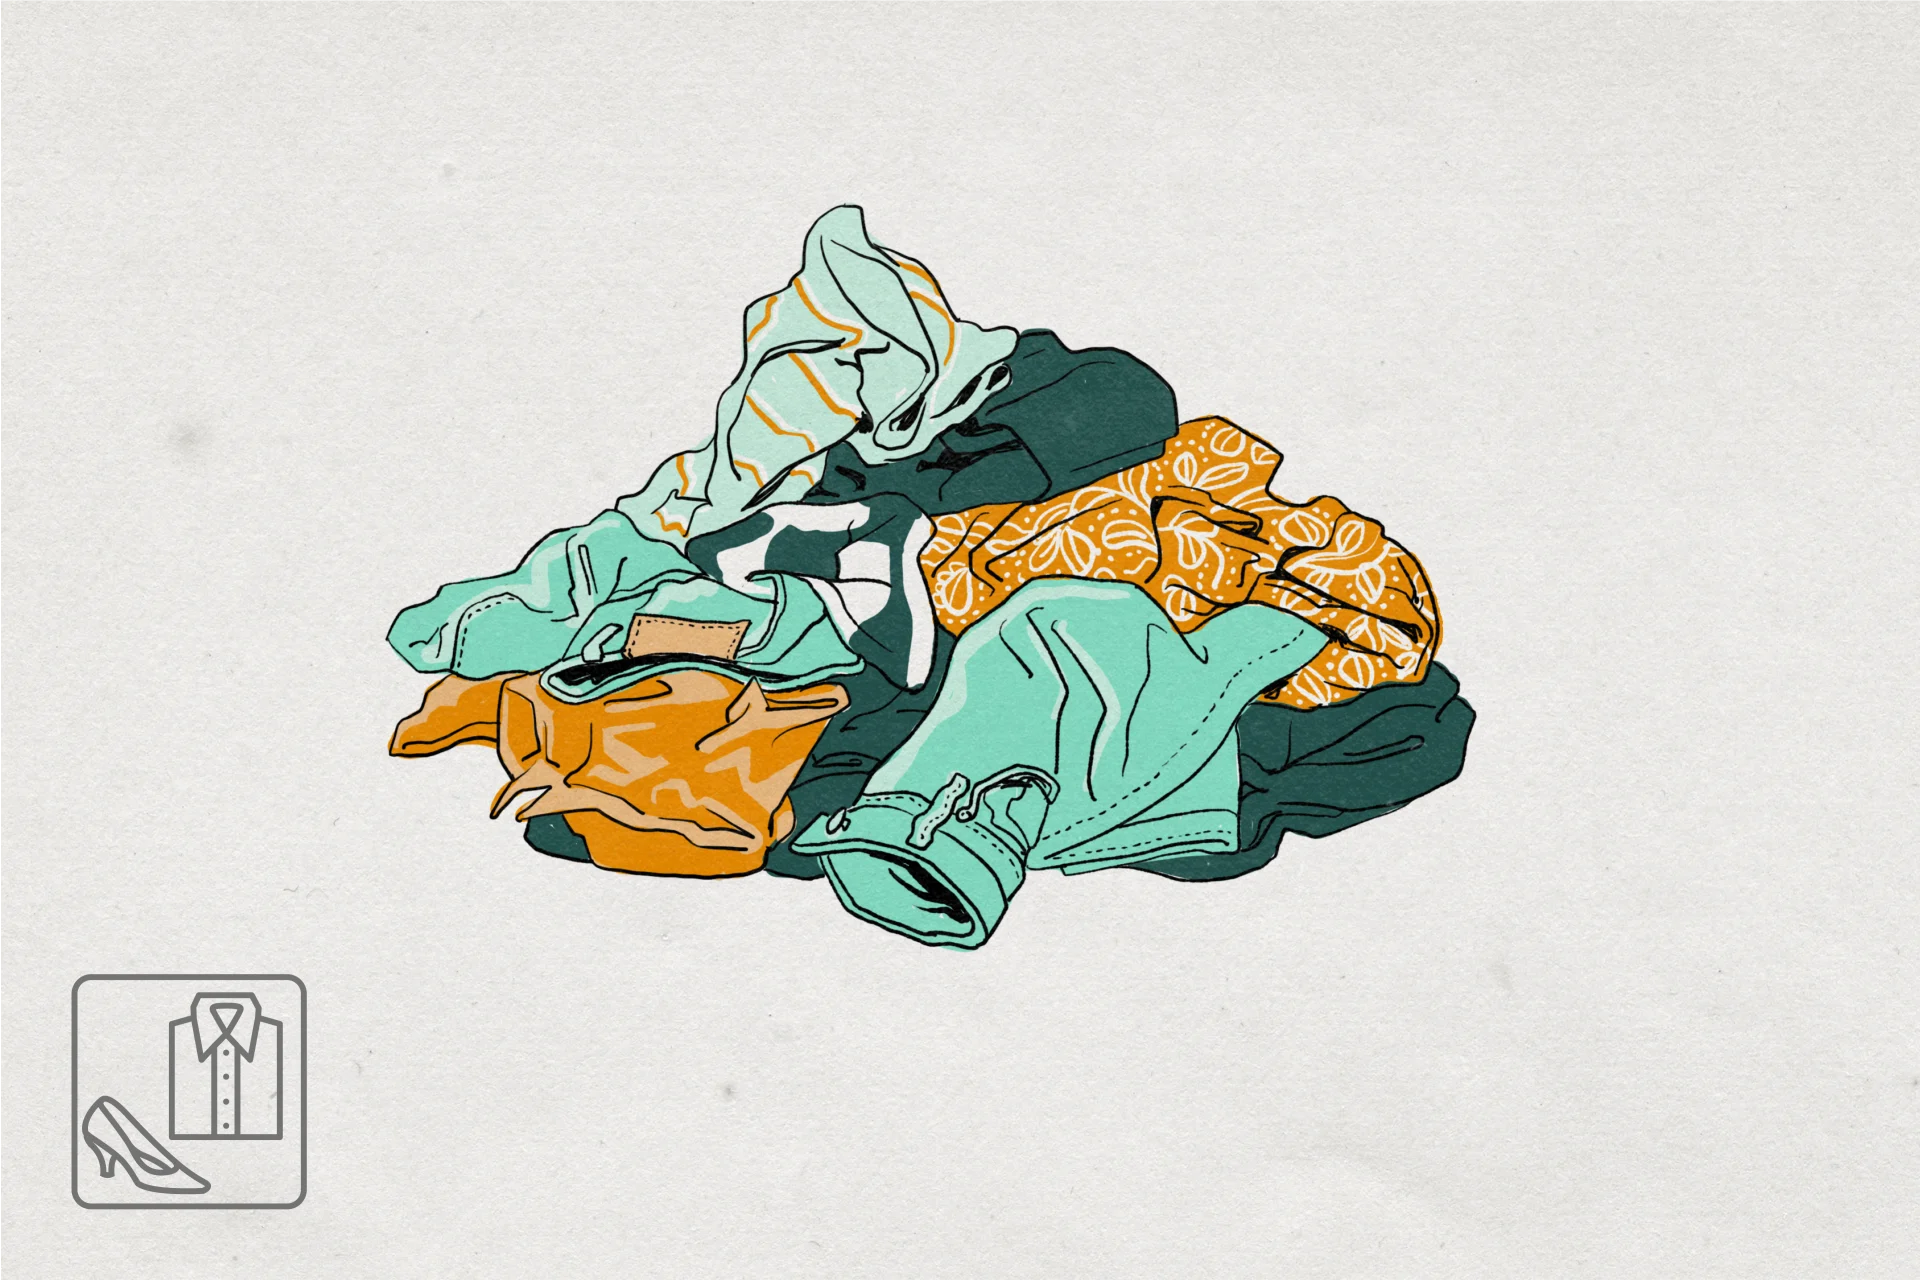 Illustration of a colourful pile of clothes comprising trousers and tops